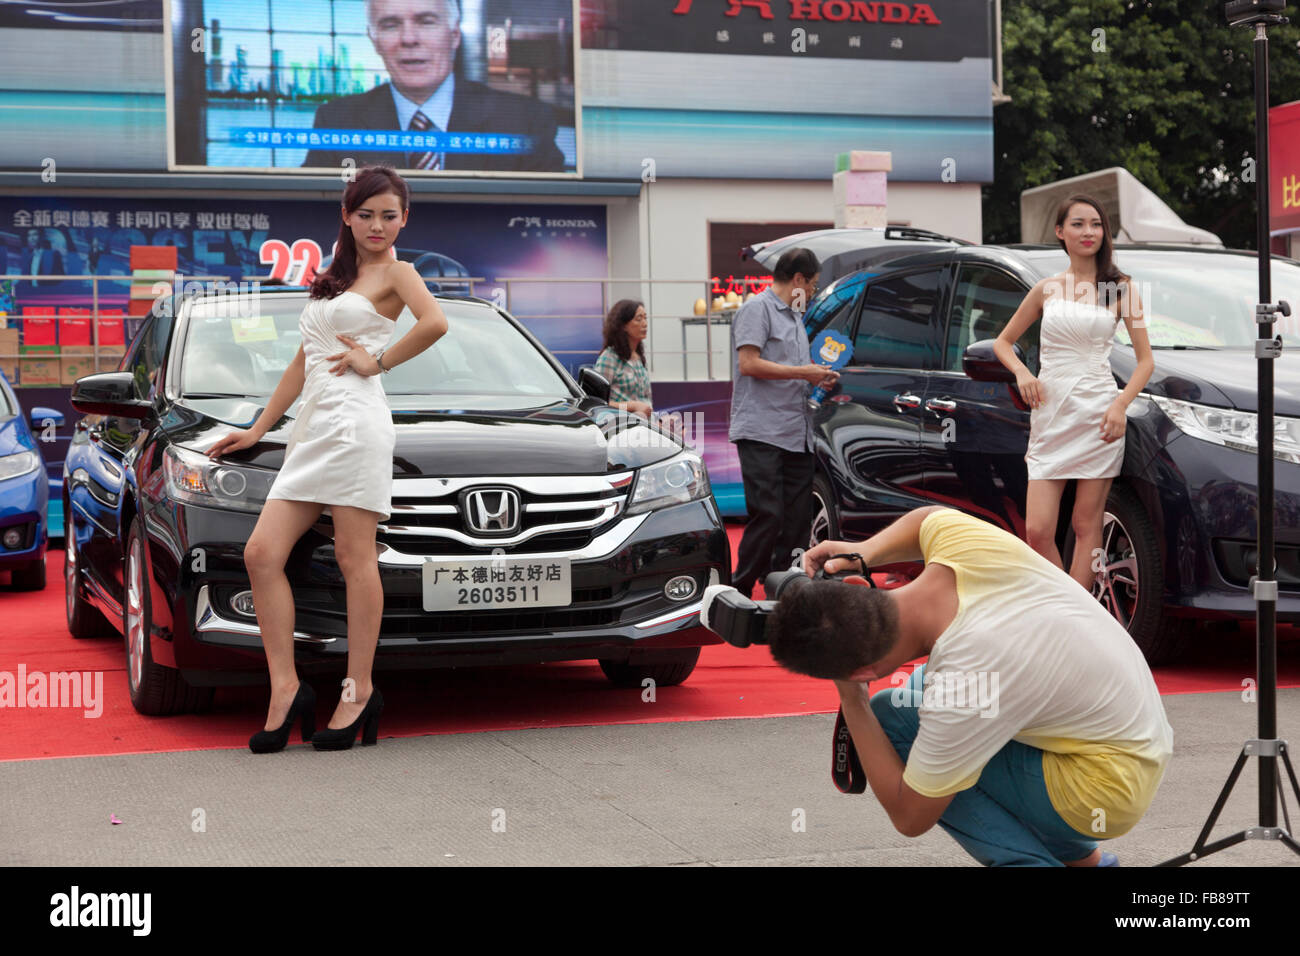 Models posing with cars at a trade fair in China attract amateur photographers and potential buyers to a motor vehicle stand. Stock Photo